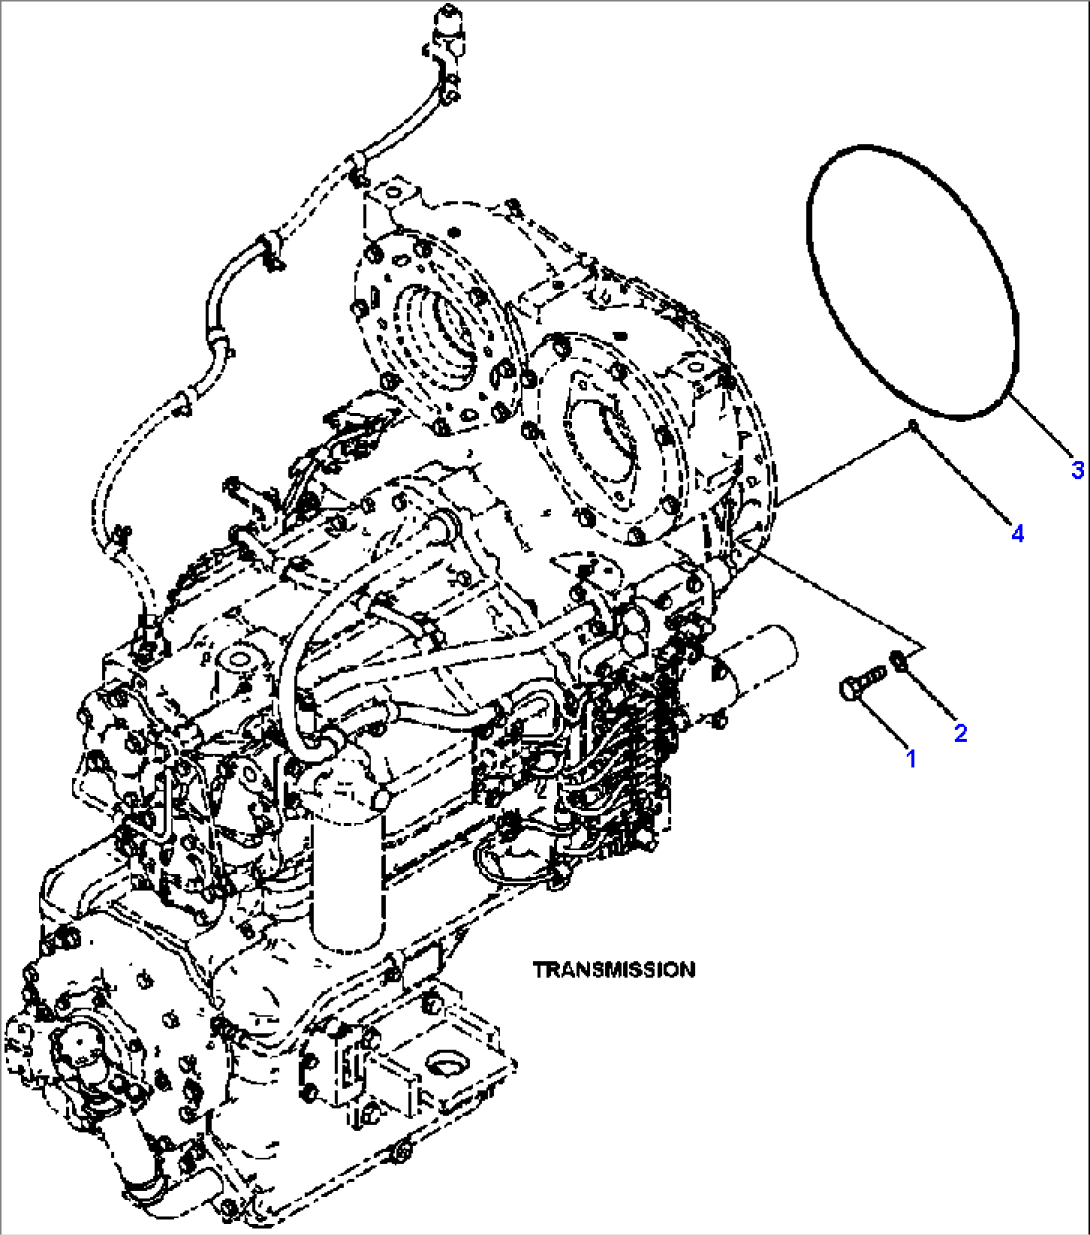 F4300-01A0 TORQUE CONVERTER AND TRANSMISSION MOUNTING TO FLYWHEEL HOUSING